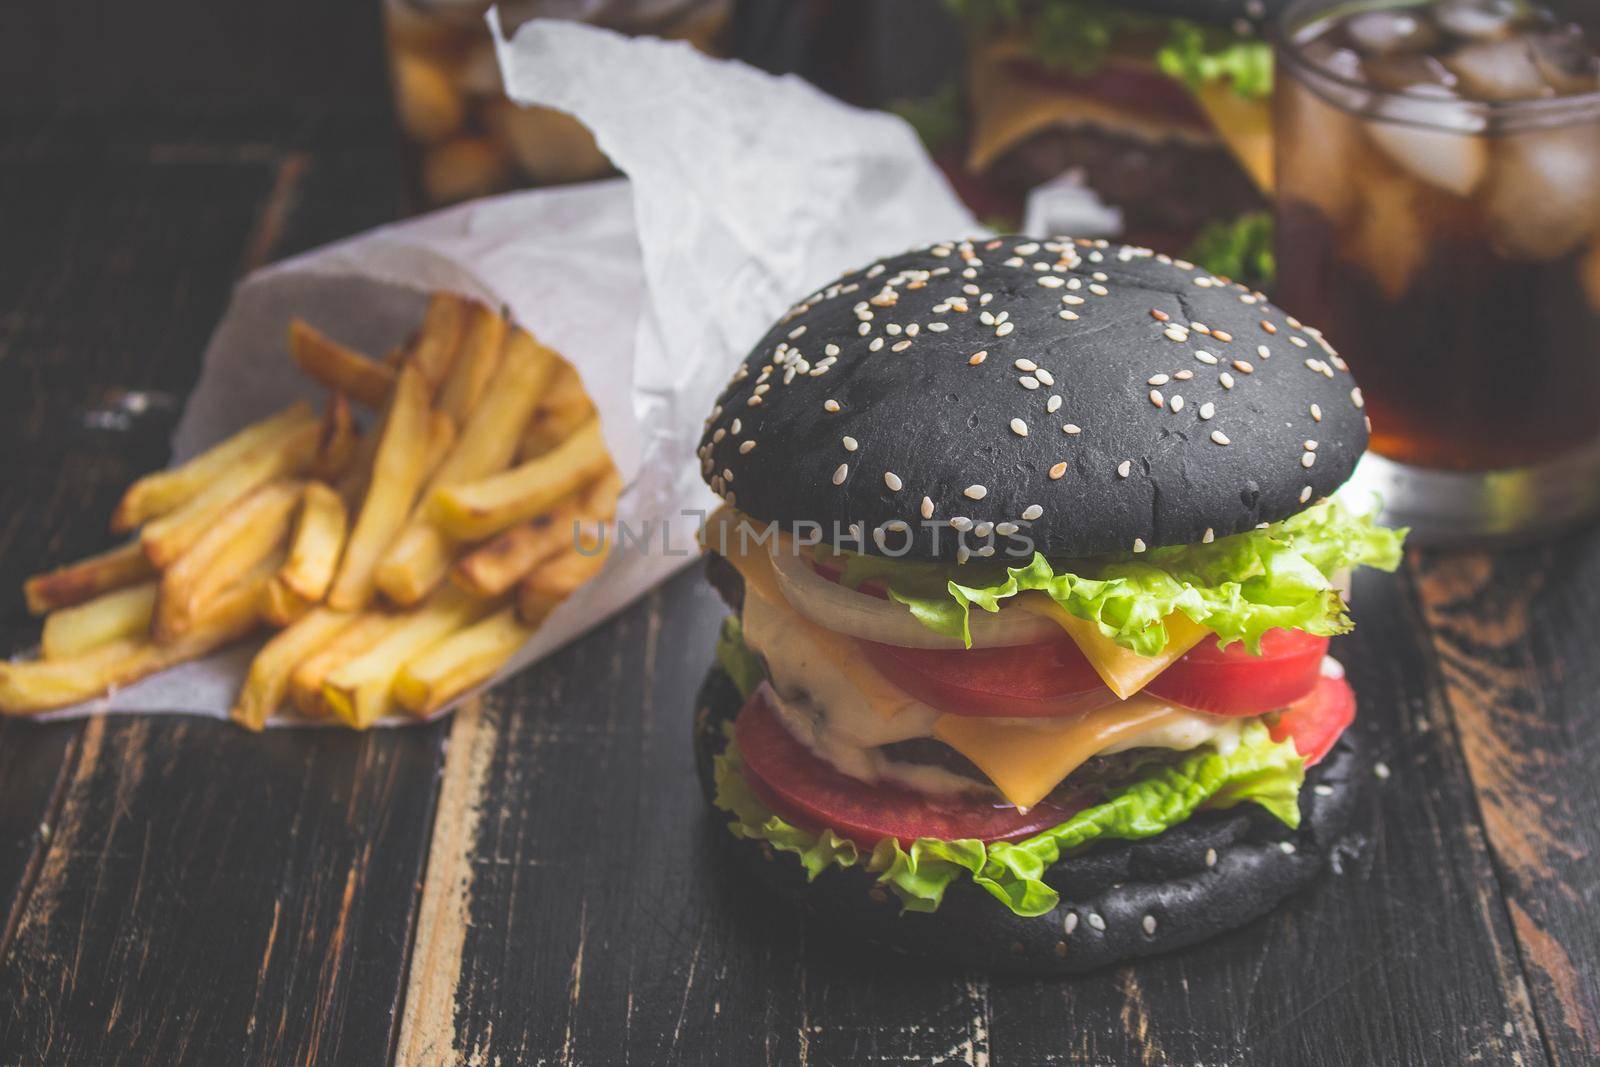 Black burger with meat patty, cheese, tomatoes, mayonnaise, french fries in a paper cup and glass of cold cola soda with ice. Dark wooden rustic table. Modern fast food lunch. Toned image